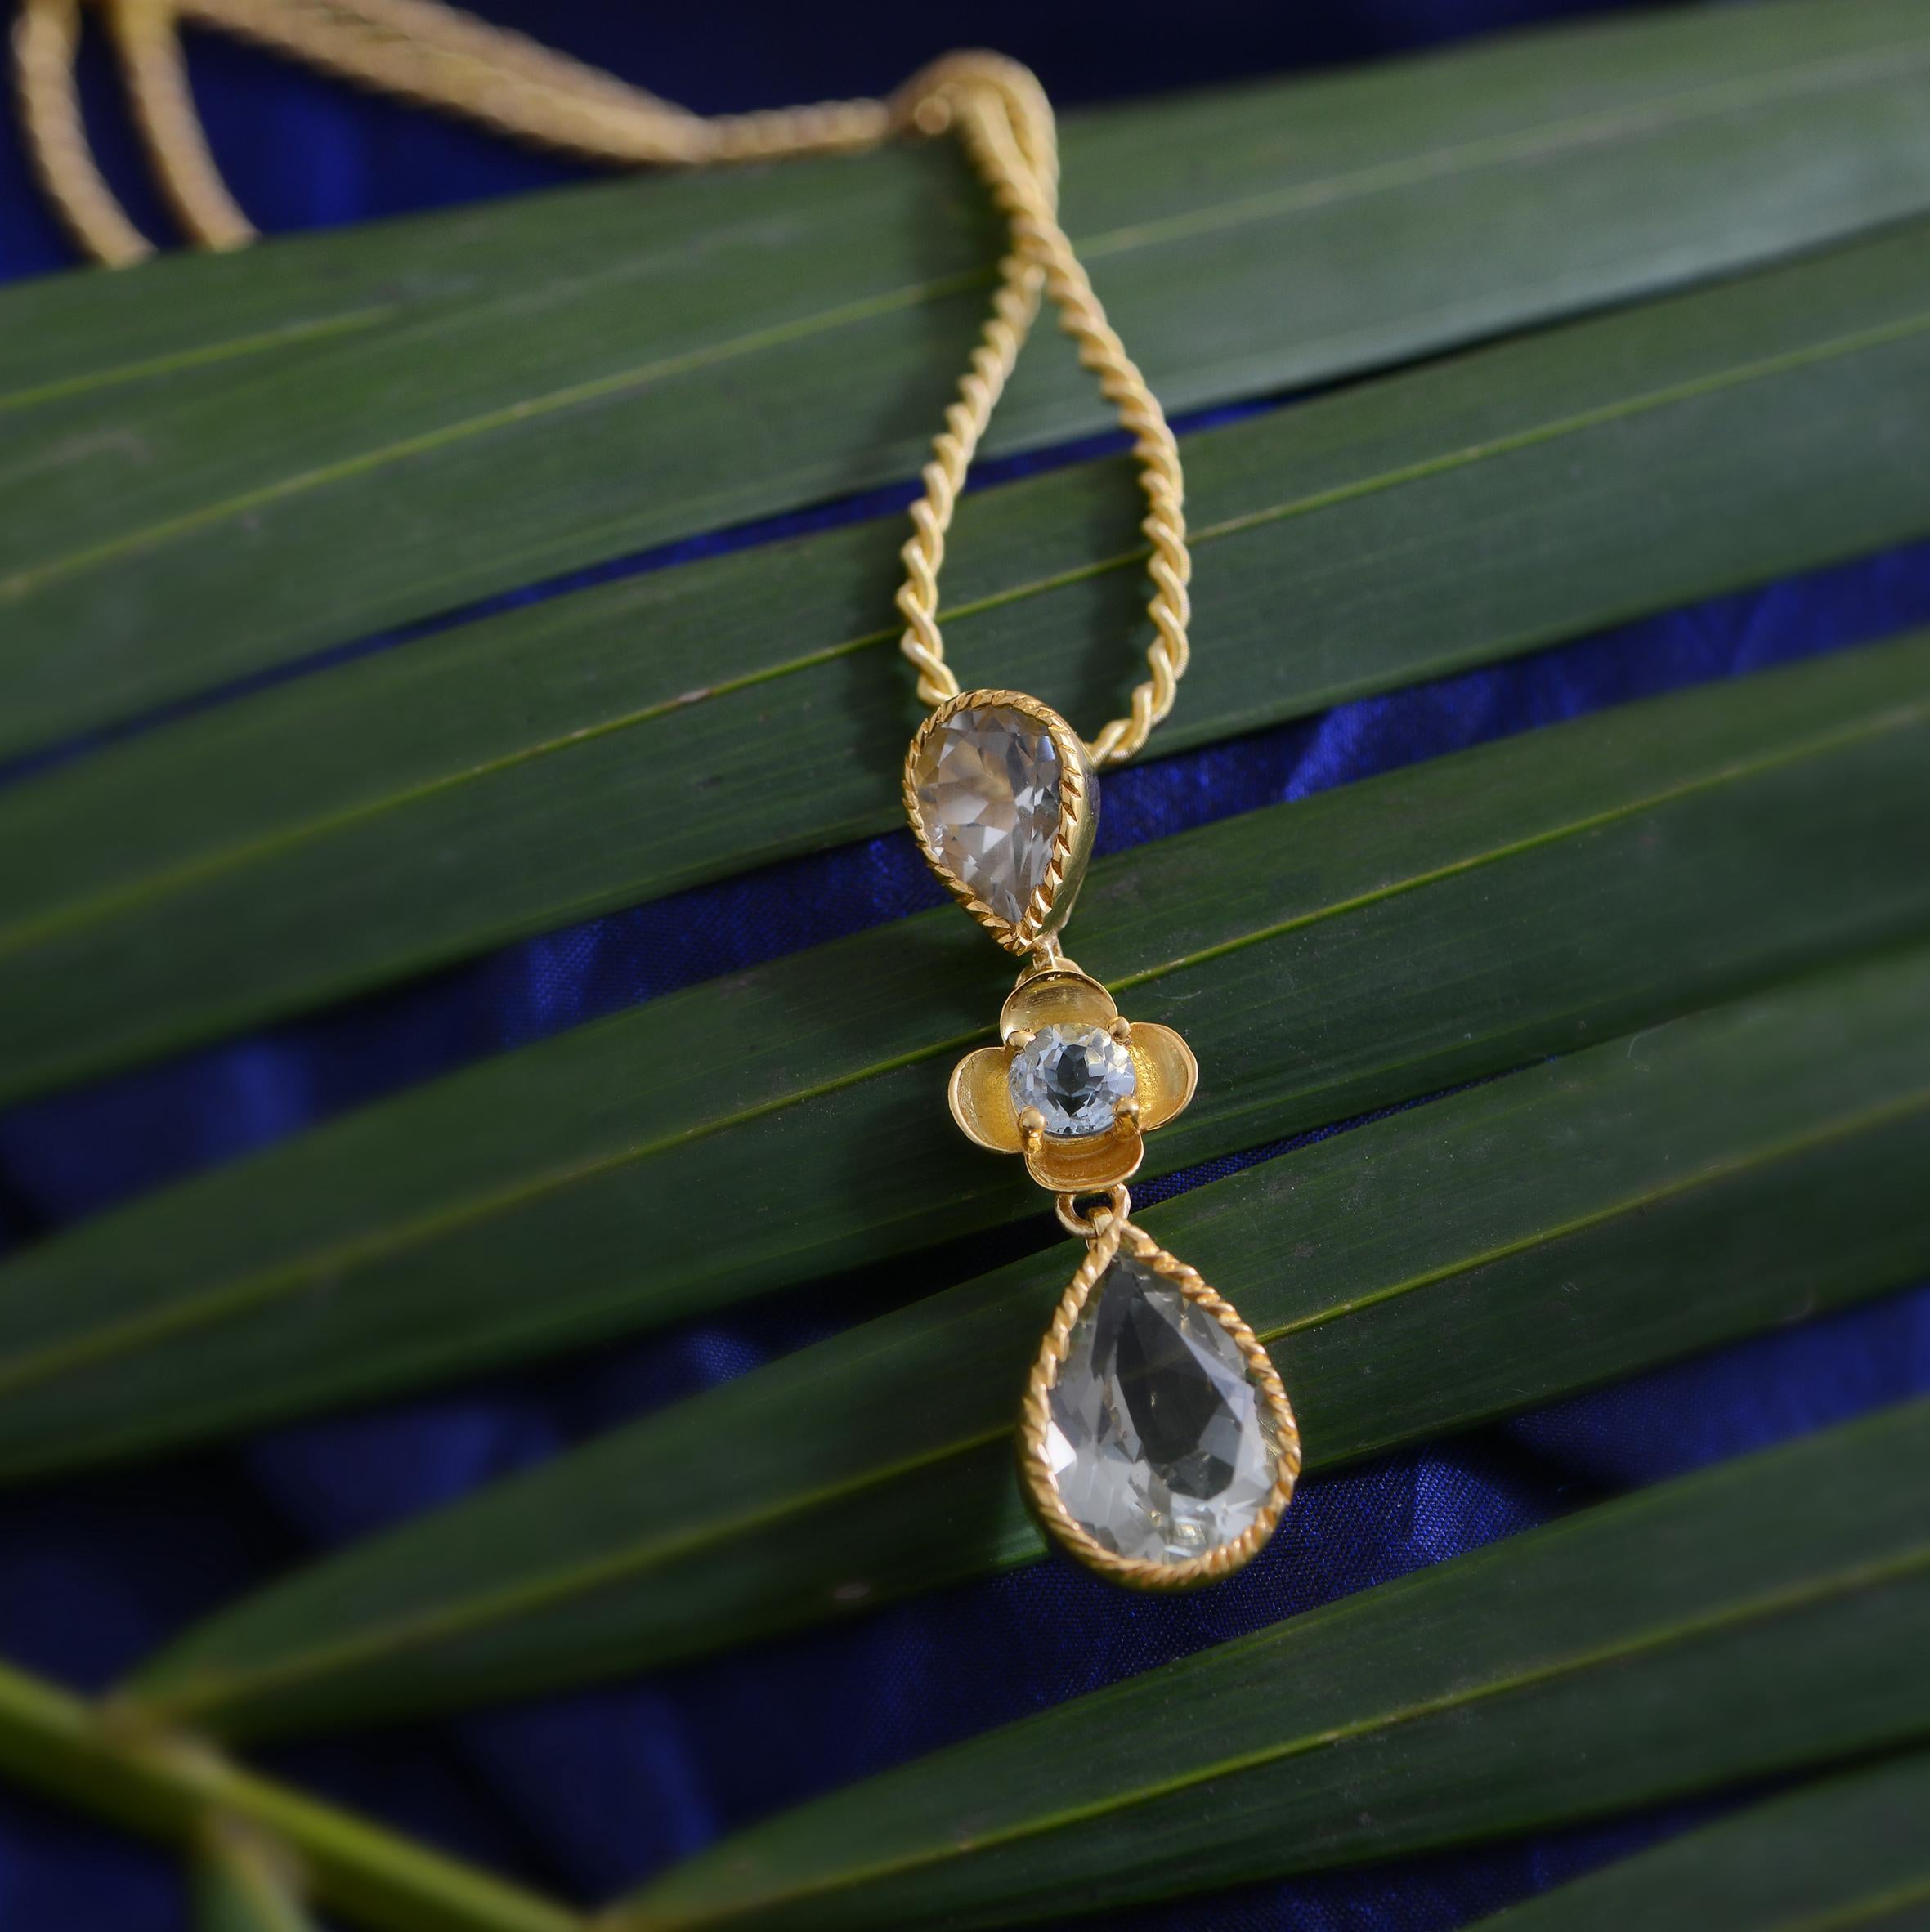 A lovely limited edition green amethyst aquamarine teardrop shaped pendant.

The pendant is made in sterling silver coated in 24ct gold vermeil and features teardrop shaped faceted green amethysts with a central aquamarine. It comes with a 26 inch